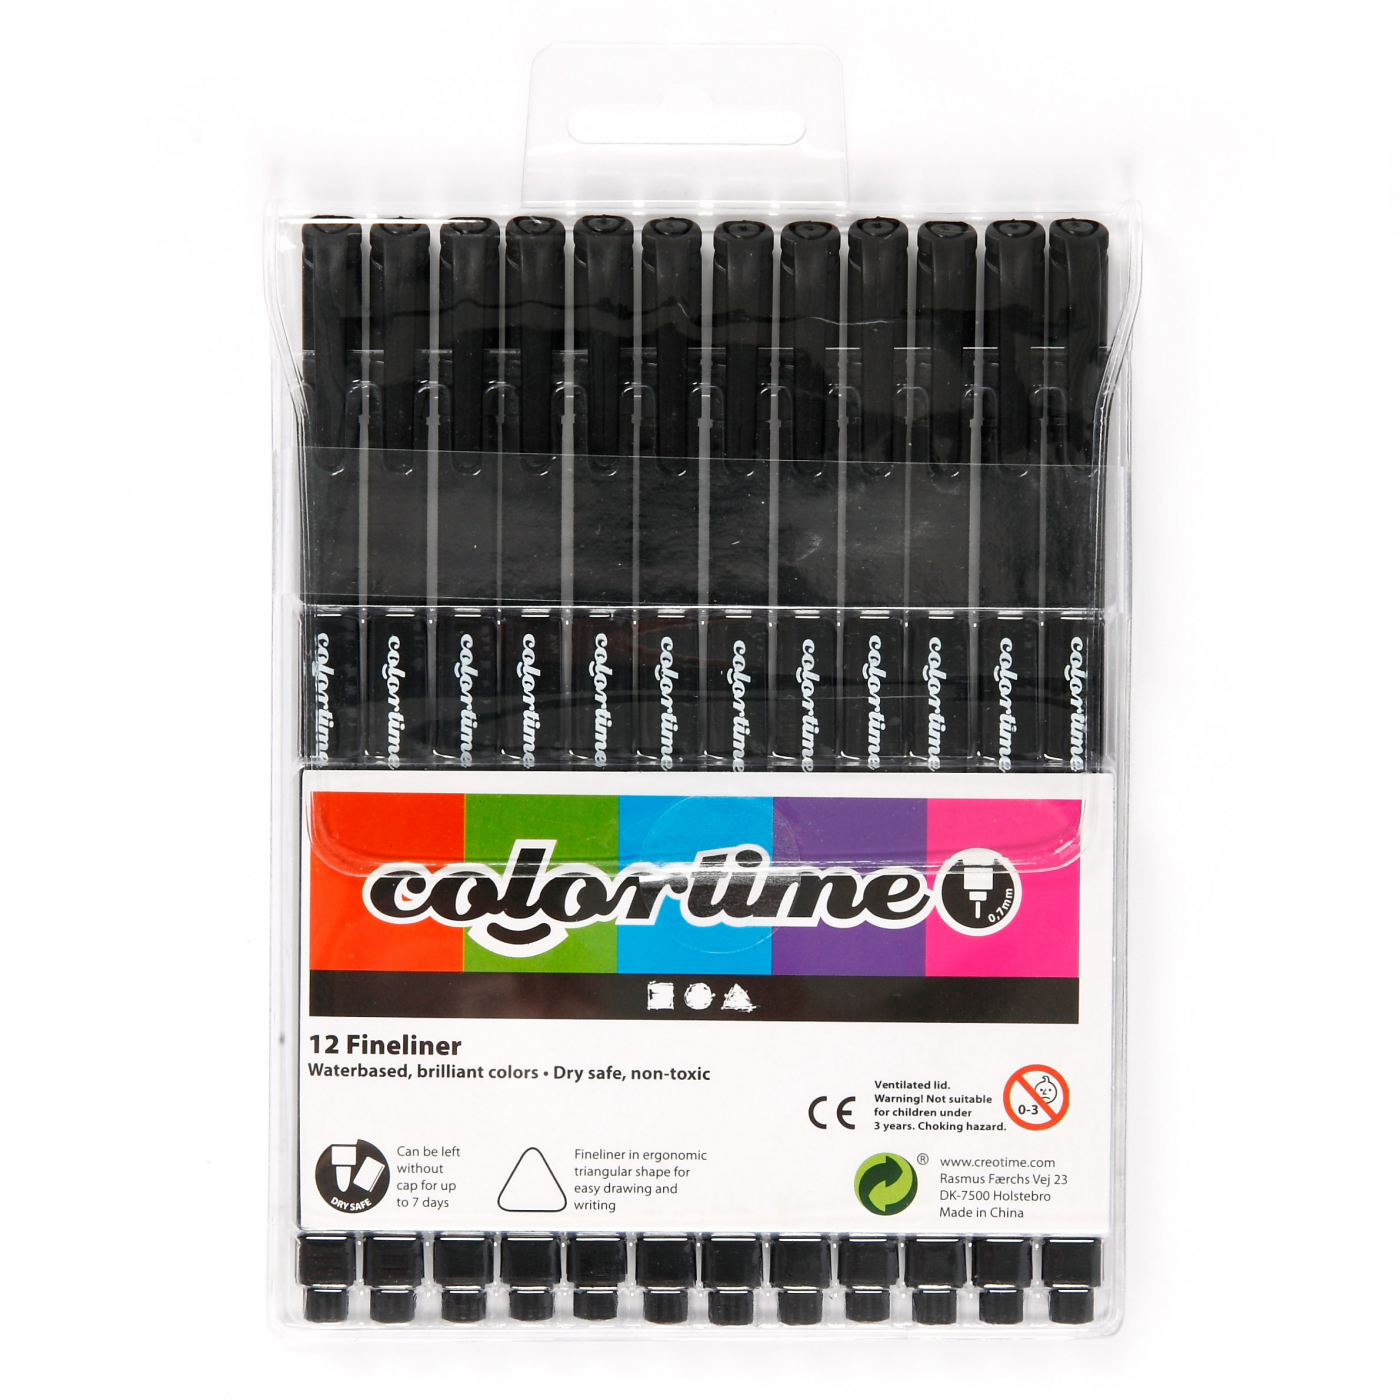 Fineliner Black 12-set in the group Pens / Writing / Fineliners at Voorcrea (111853)